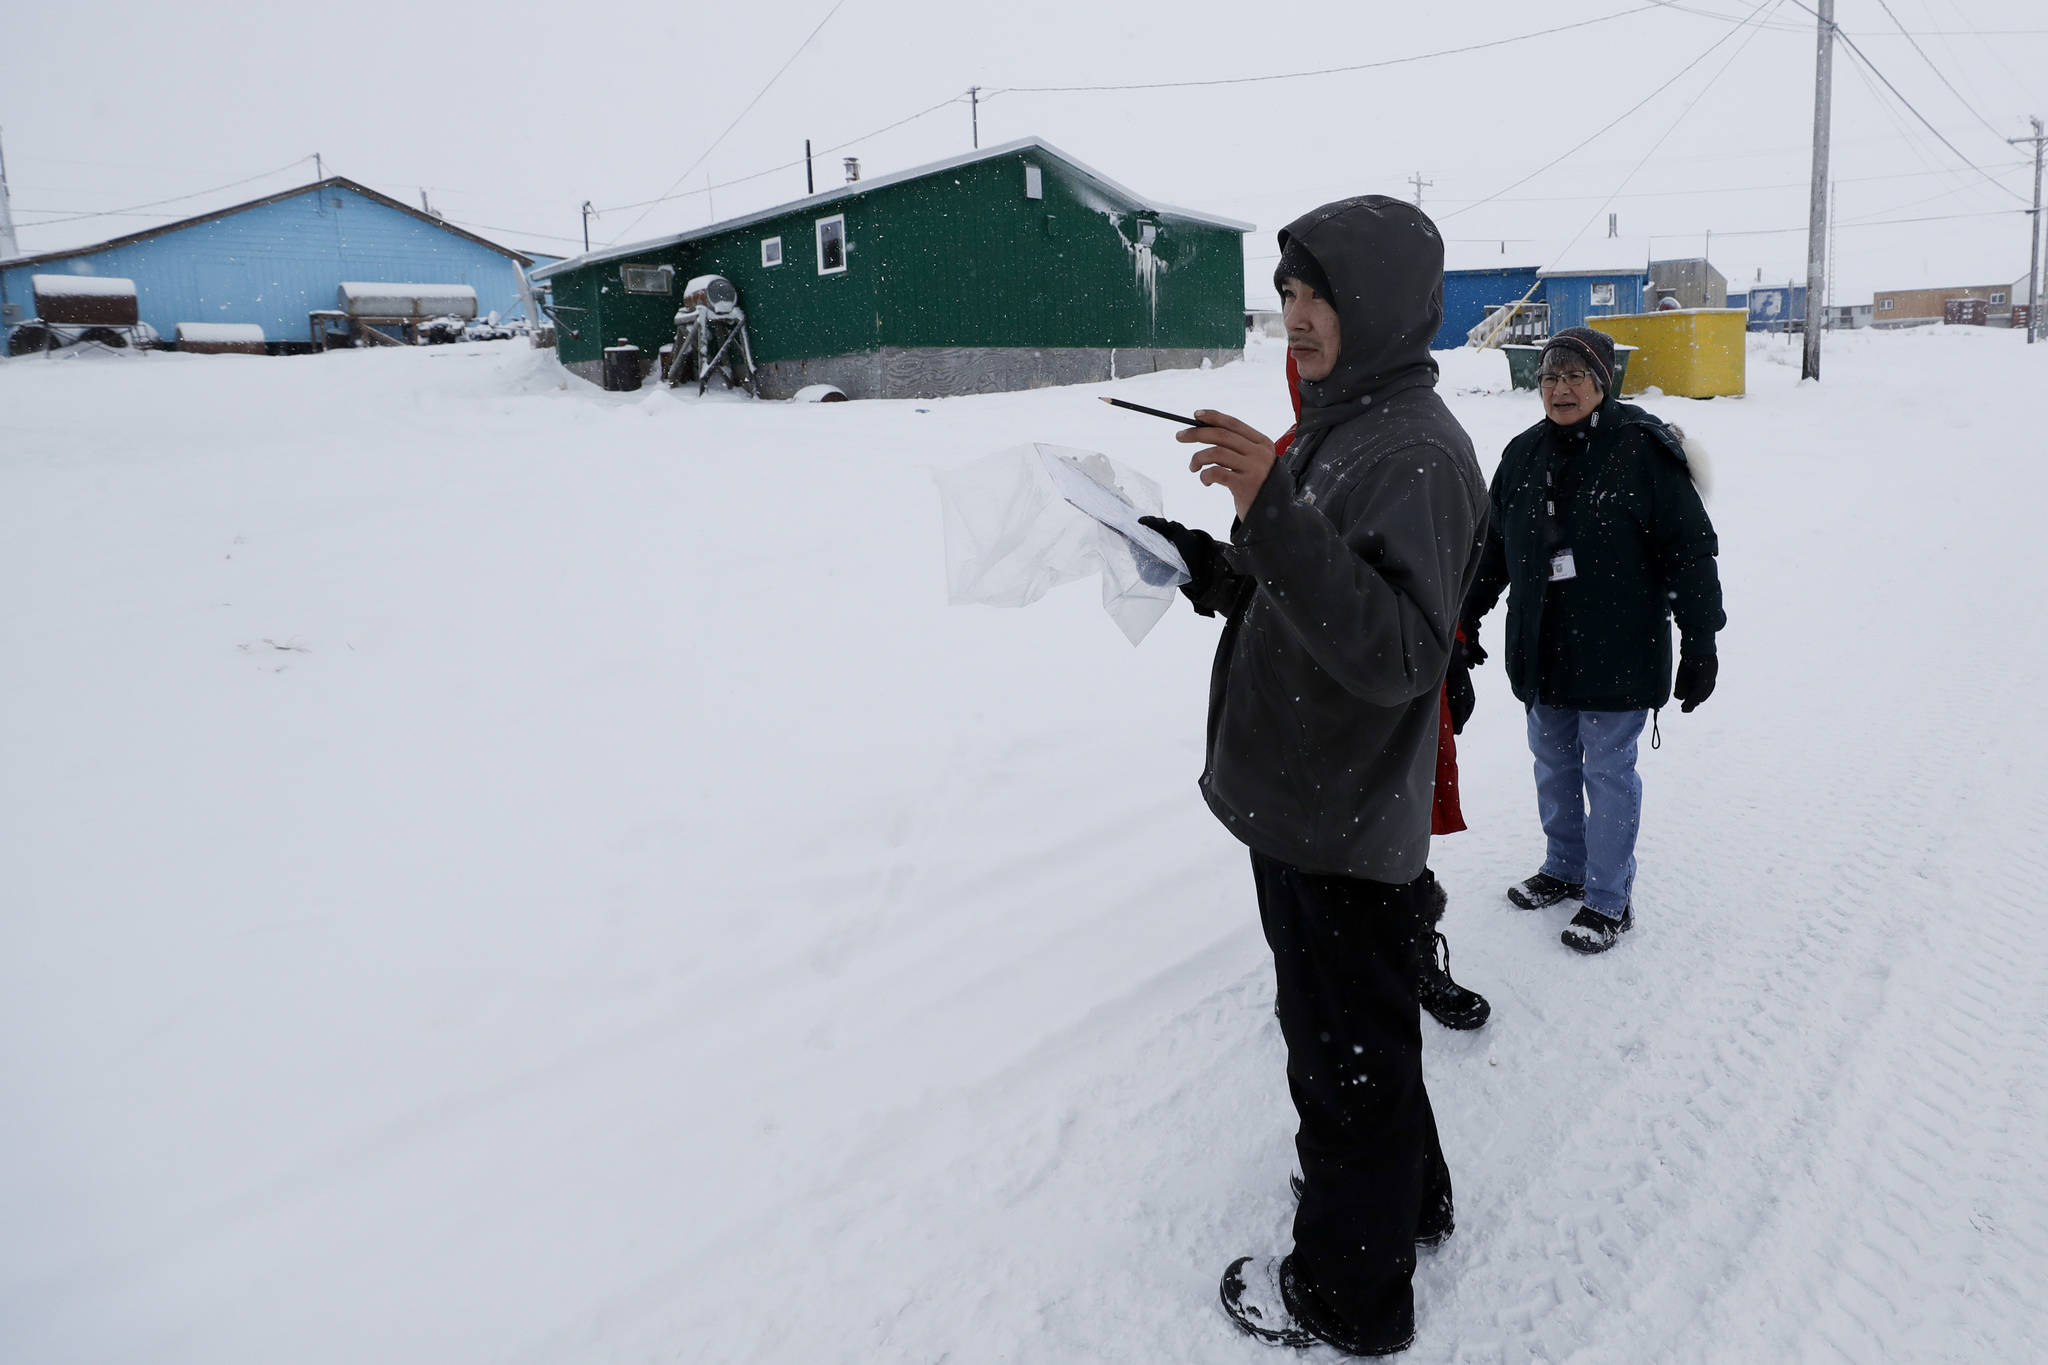 In this Jan. 20, 2020, file photo, census workers verify that their maps match up to the right amount of houses in Toksook Bay, Alaska, a mostly Yup’ik village on the edge of the Bering Sea. Alaska’s population grew by 23,160 people, or 3.3%, in the last decade, according to the first numbers released Monday for the 2020 Census. (AP Photo/Gregory Bull, File)